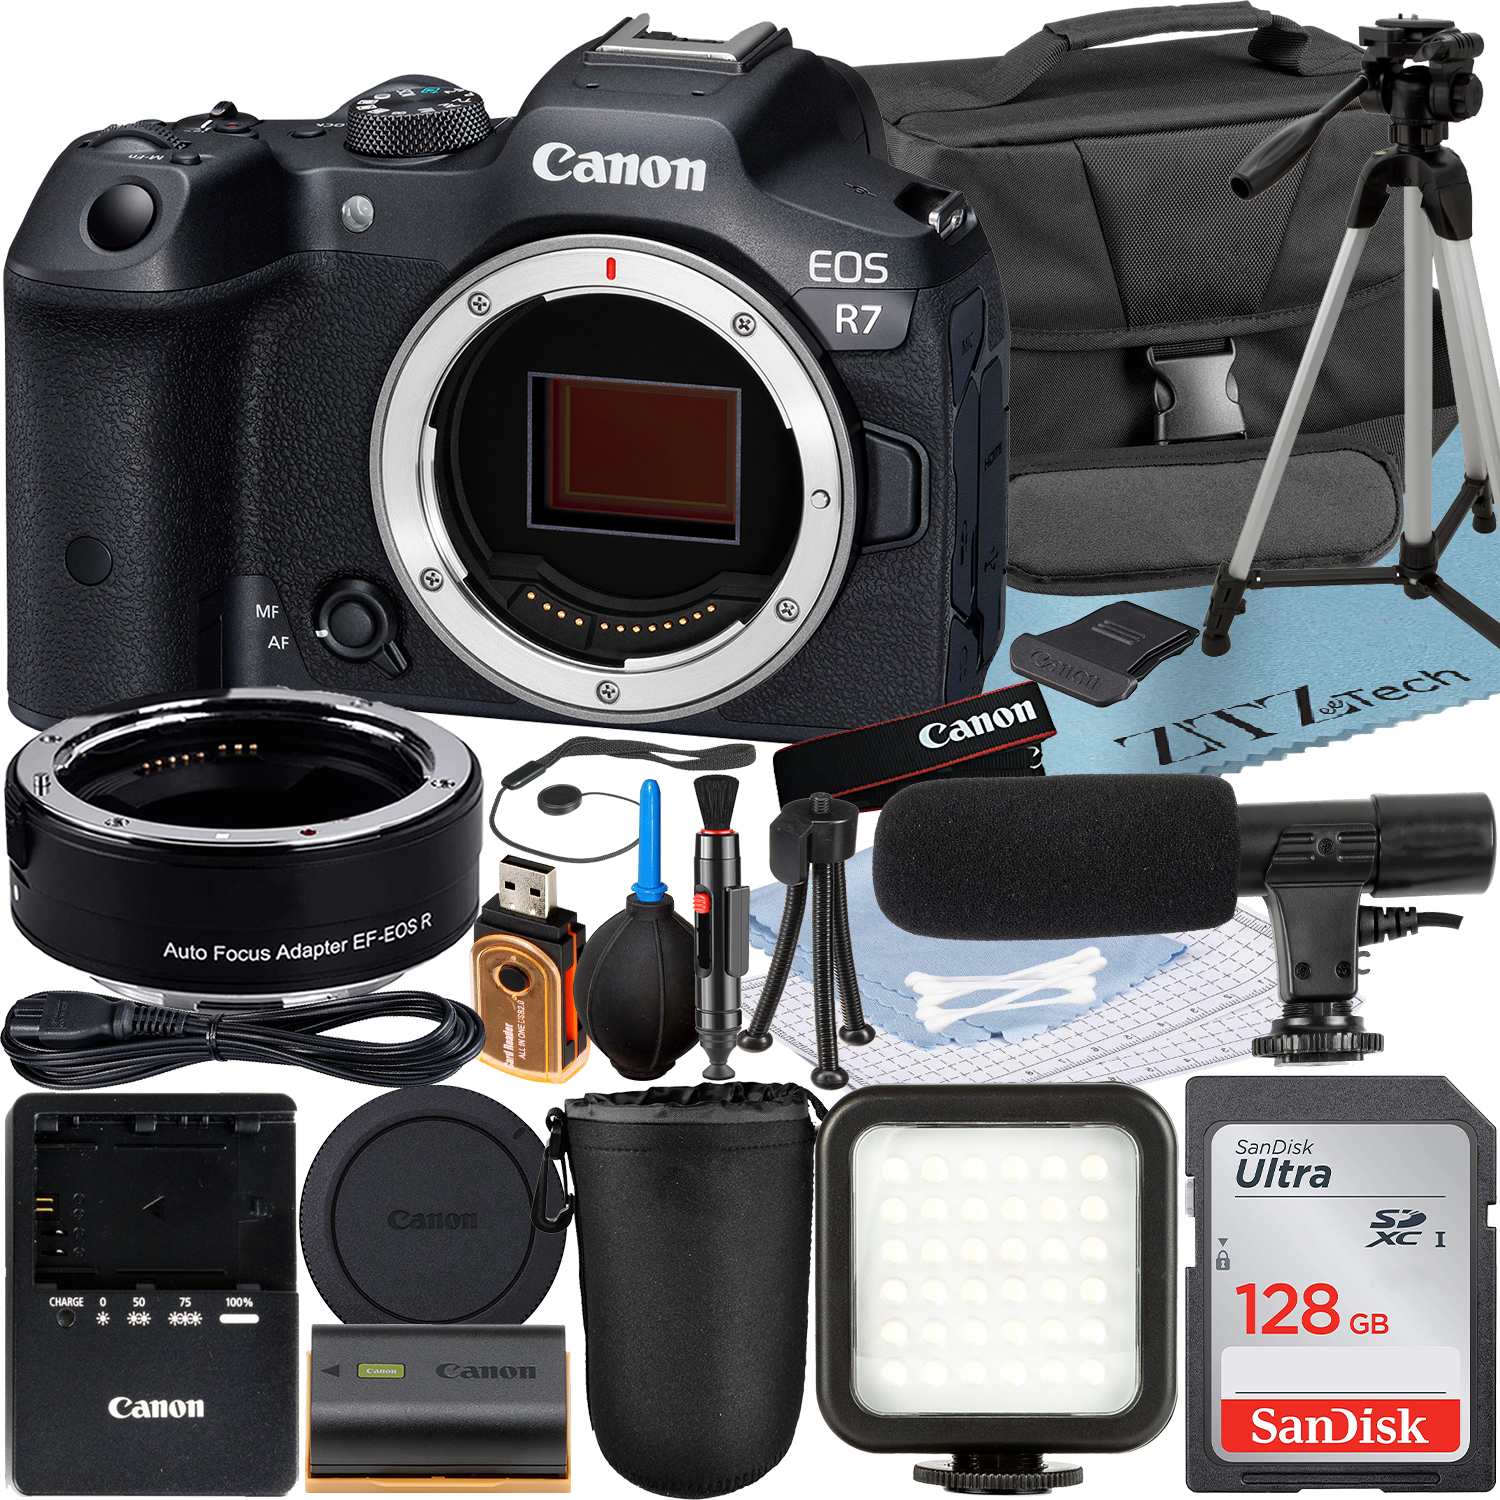 Canon EOS R7 Mirrorless Camera (Body) with Mount Adapter + SanDisk 128GB Memory Card + Case + LED Flash + ZeeTech Accessory Bundle